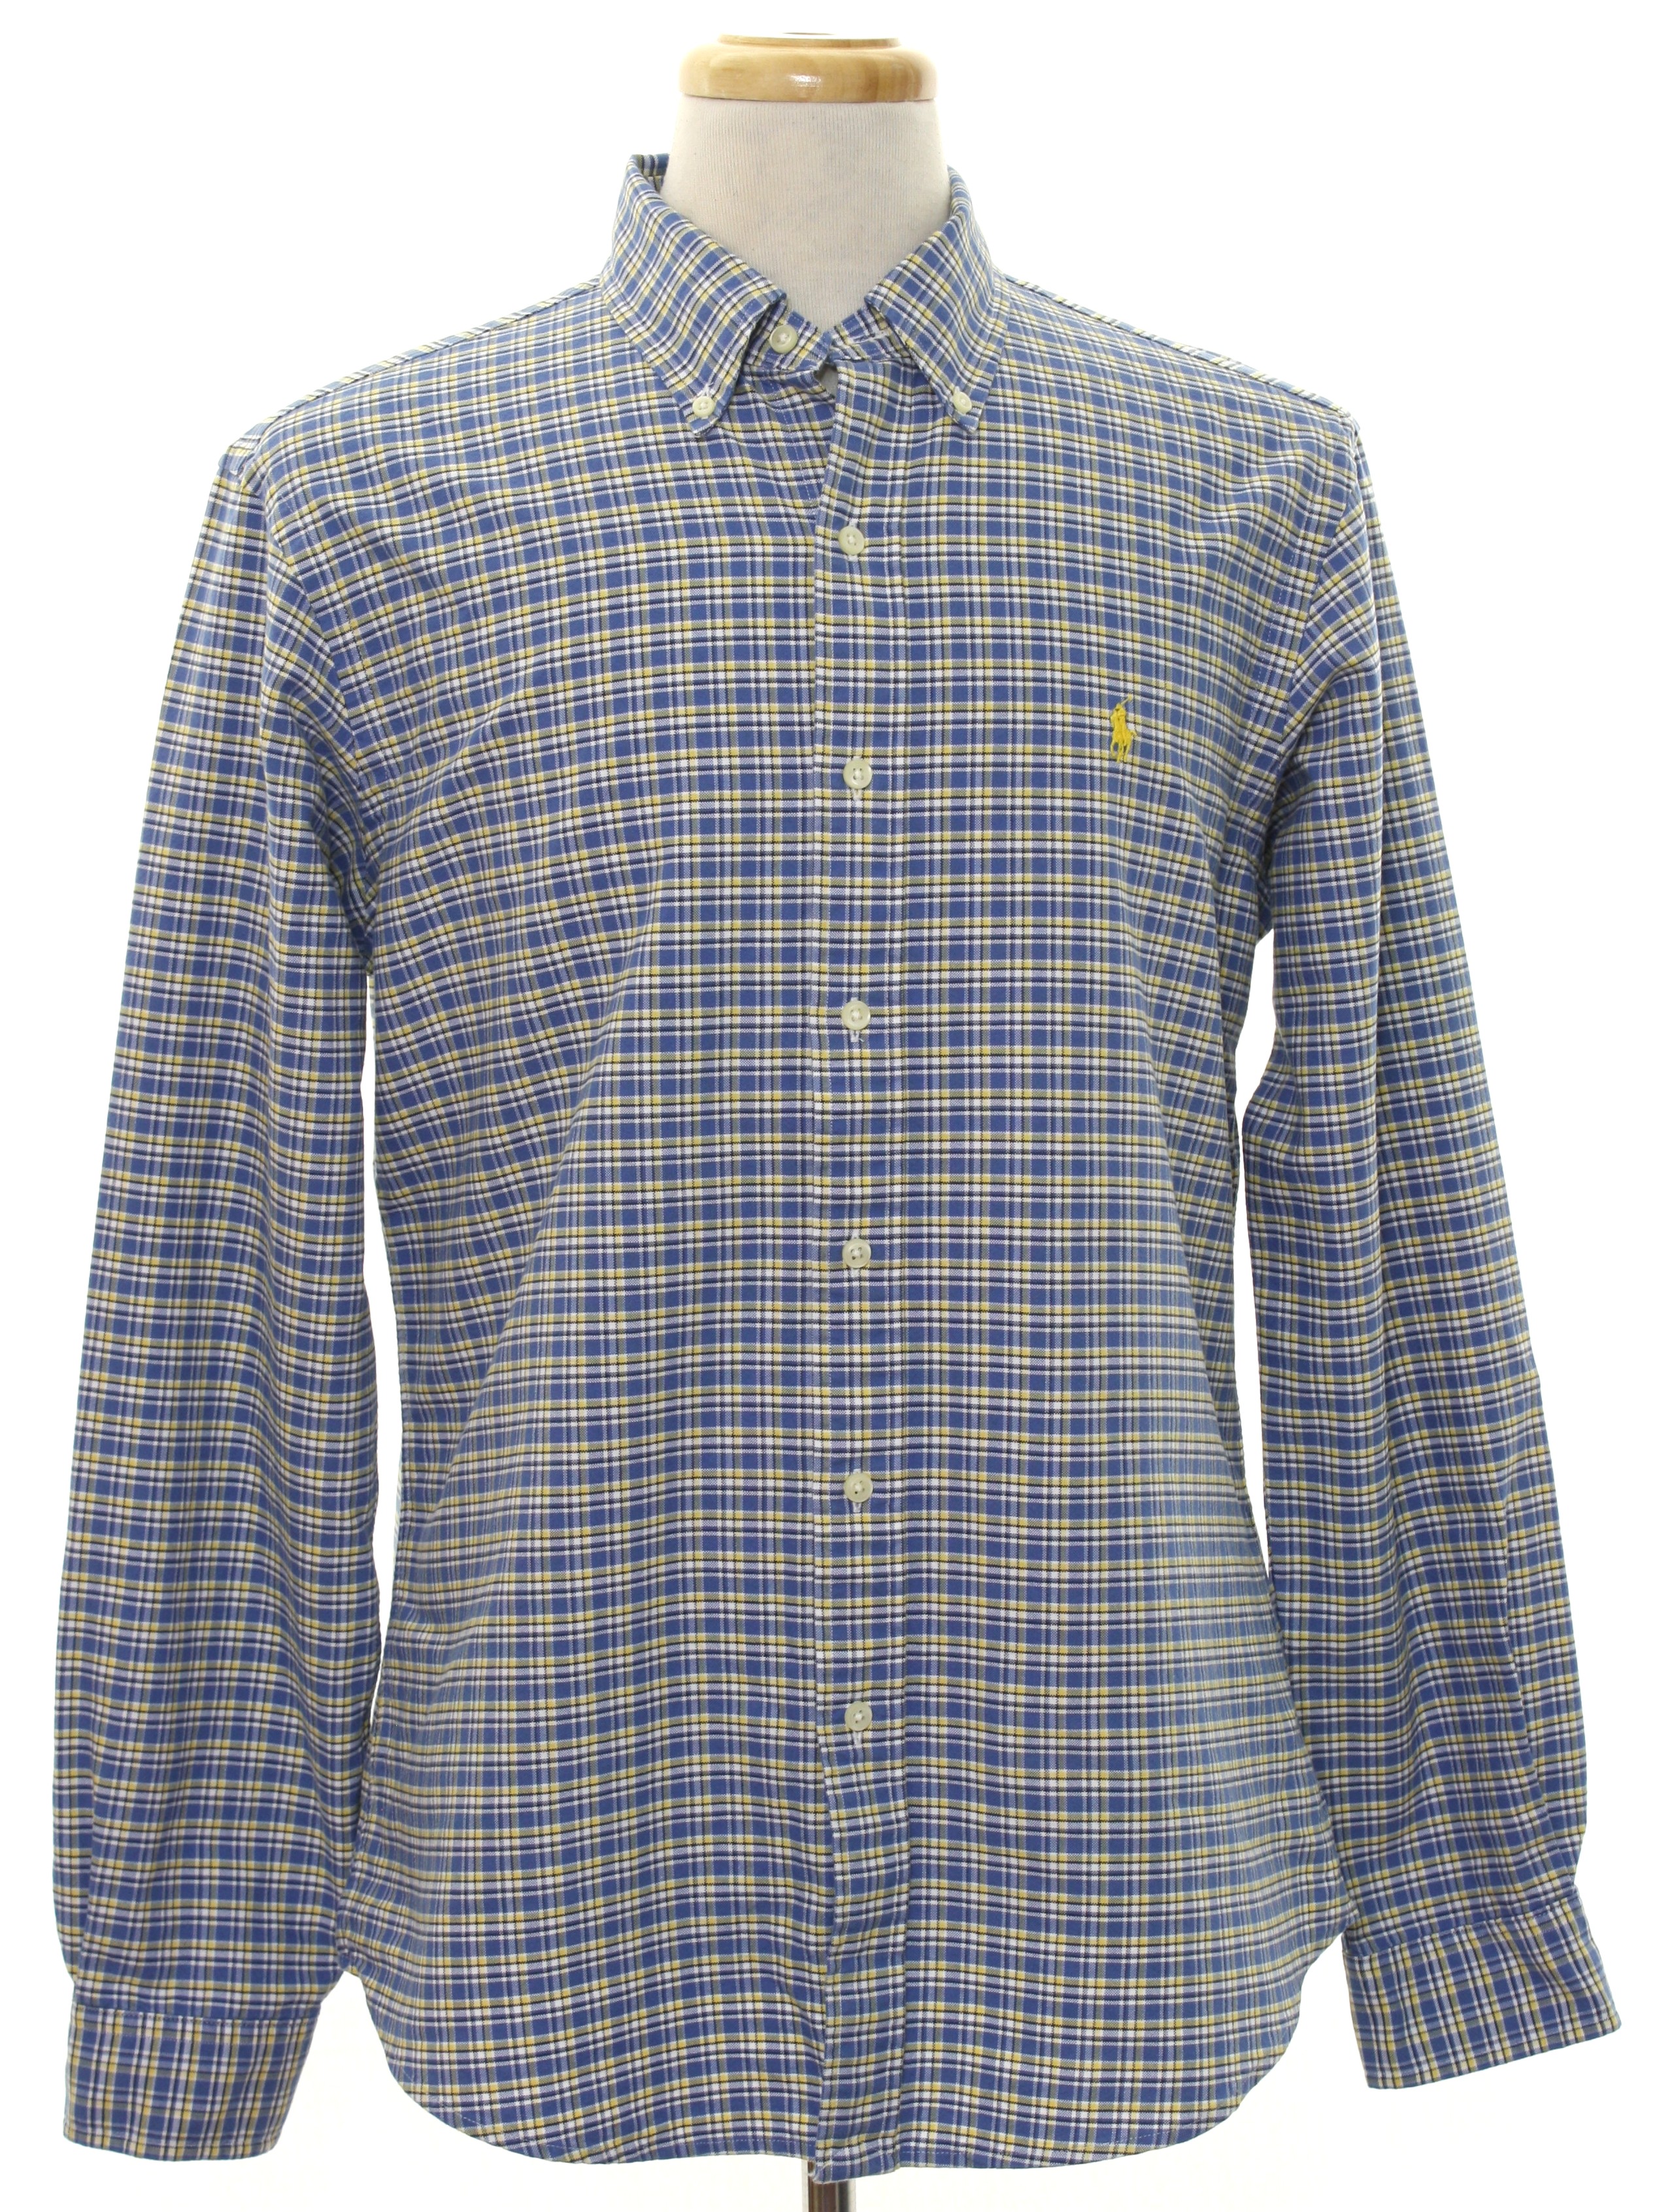 90's Ralph Lauren Shirt: 90s -Ralph Lauren- Mens white background, blue,  yellow tattersall plaid cotton oxford cloth preppy dress shirt with  longsleeves, slightly fitted sides, shirttails hemline, button front and  cuffs, and